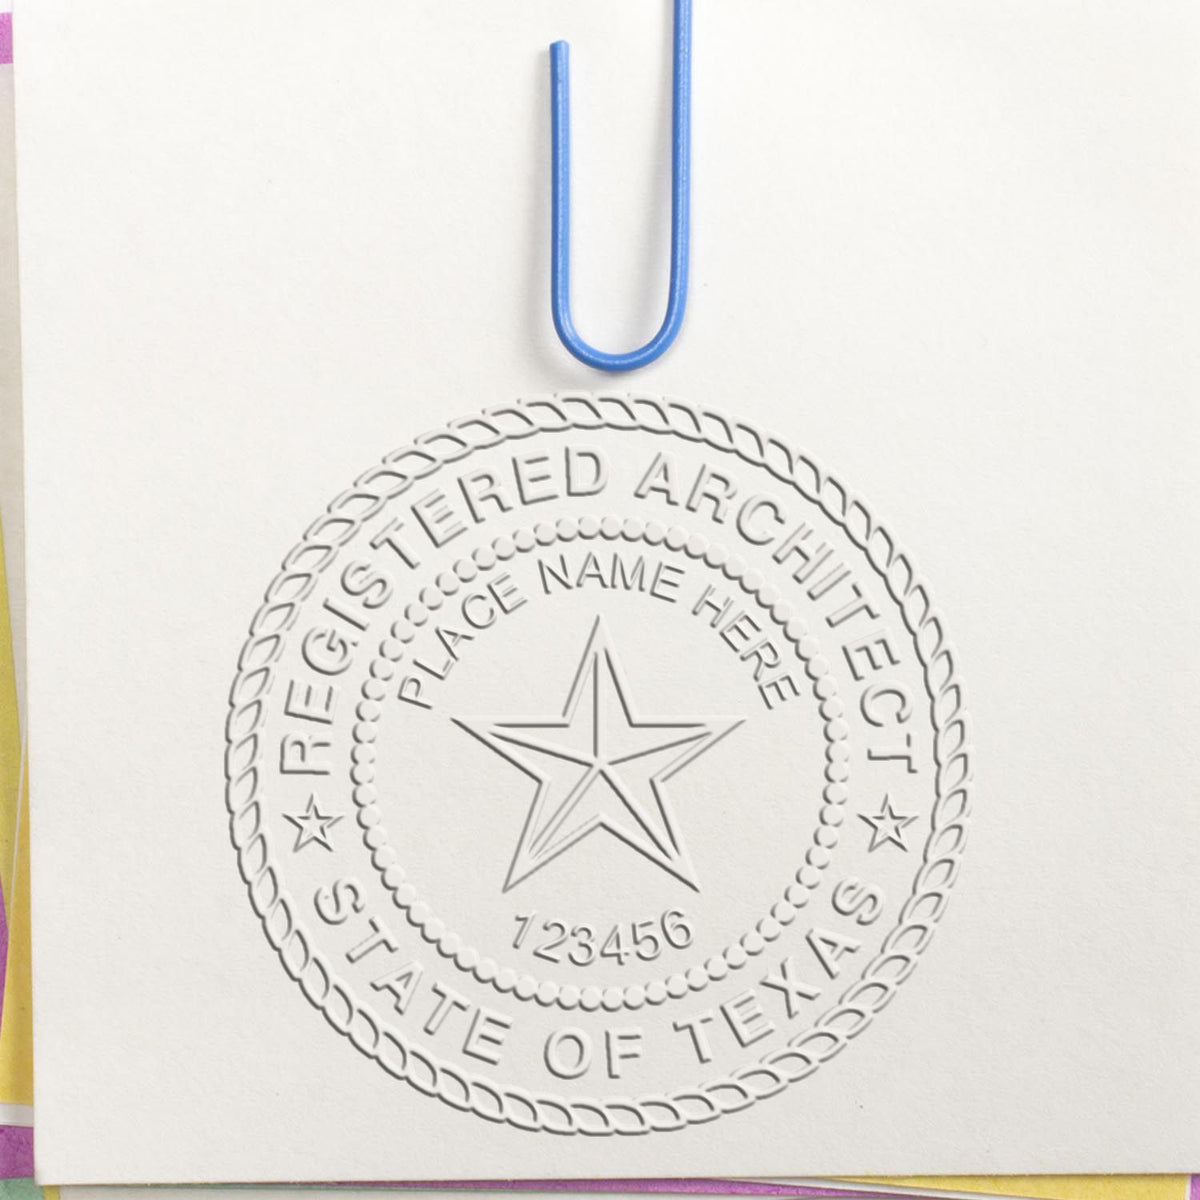 This paper is stamped with a sample imprint of the Extended Long Reach Texas Architect Seal Embosser, signifying its quality and reliability.